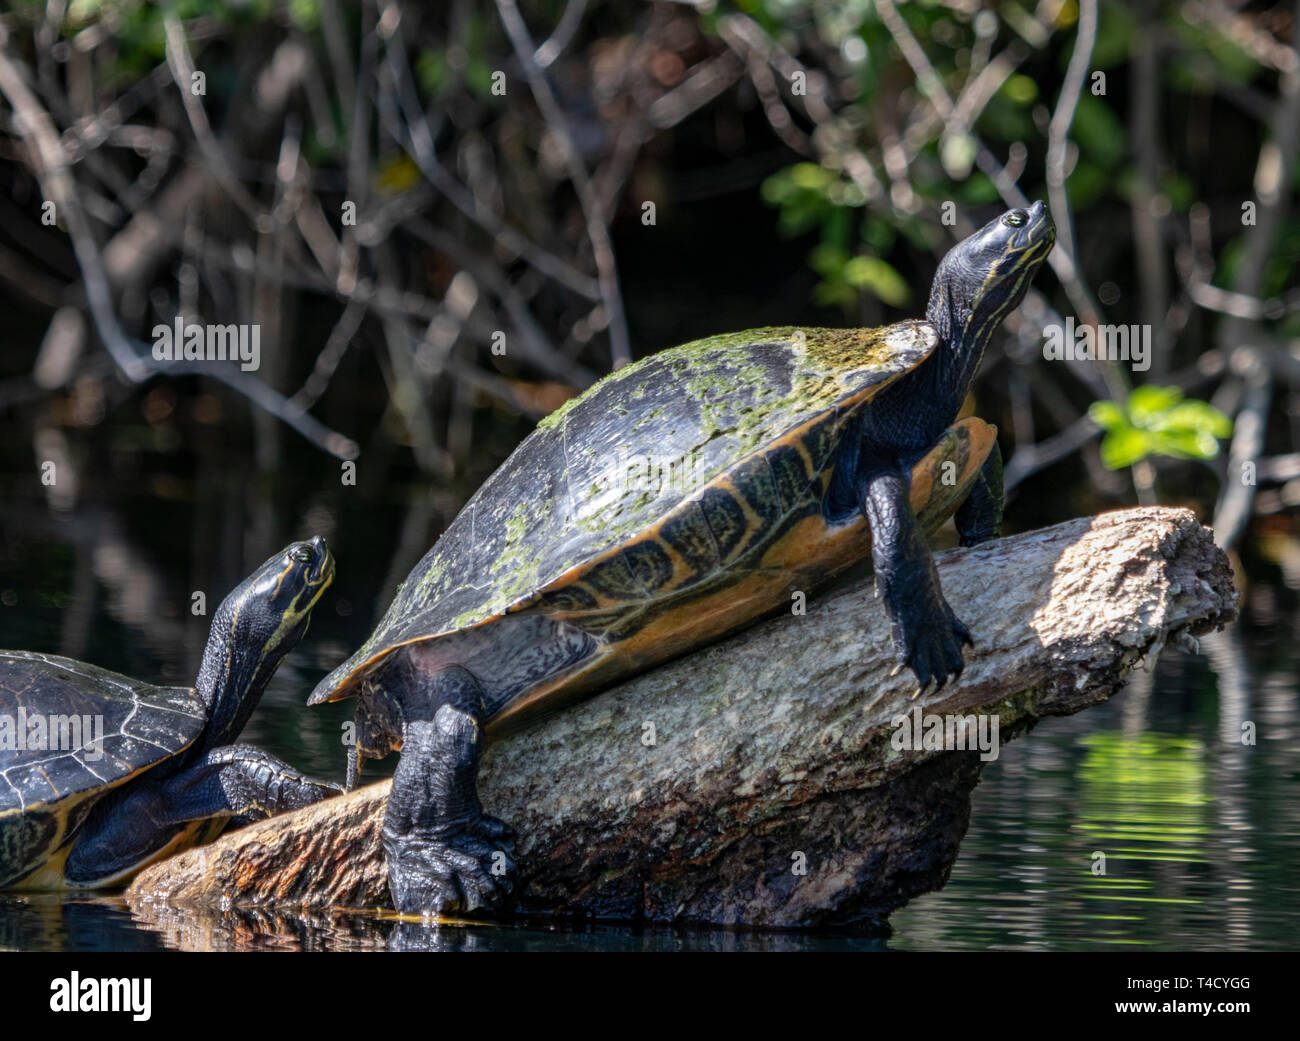 Two turtles sunbathing on a log in the Rainbow river, Dunnellon Florida Stock Photo